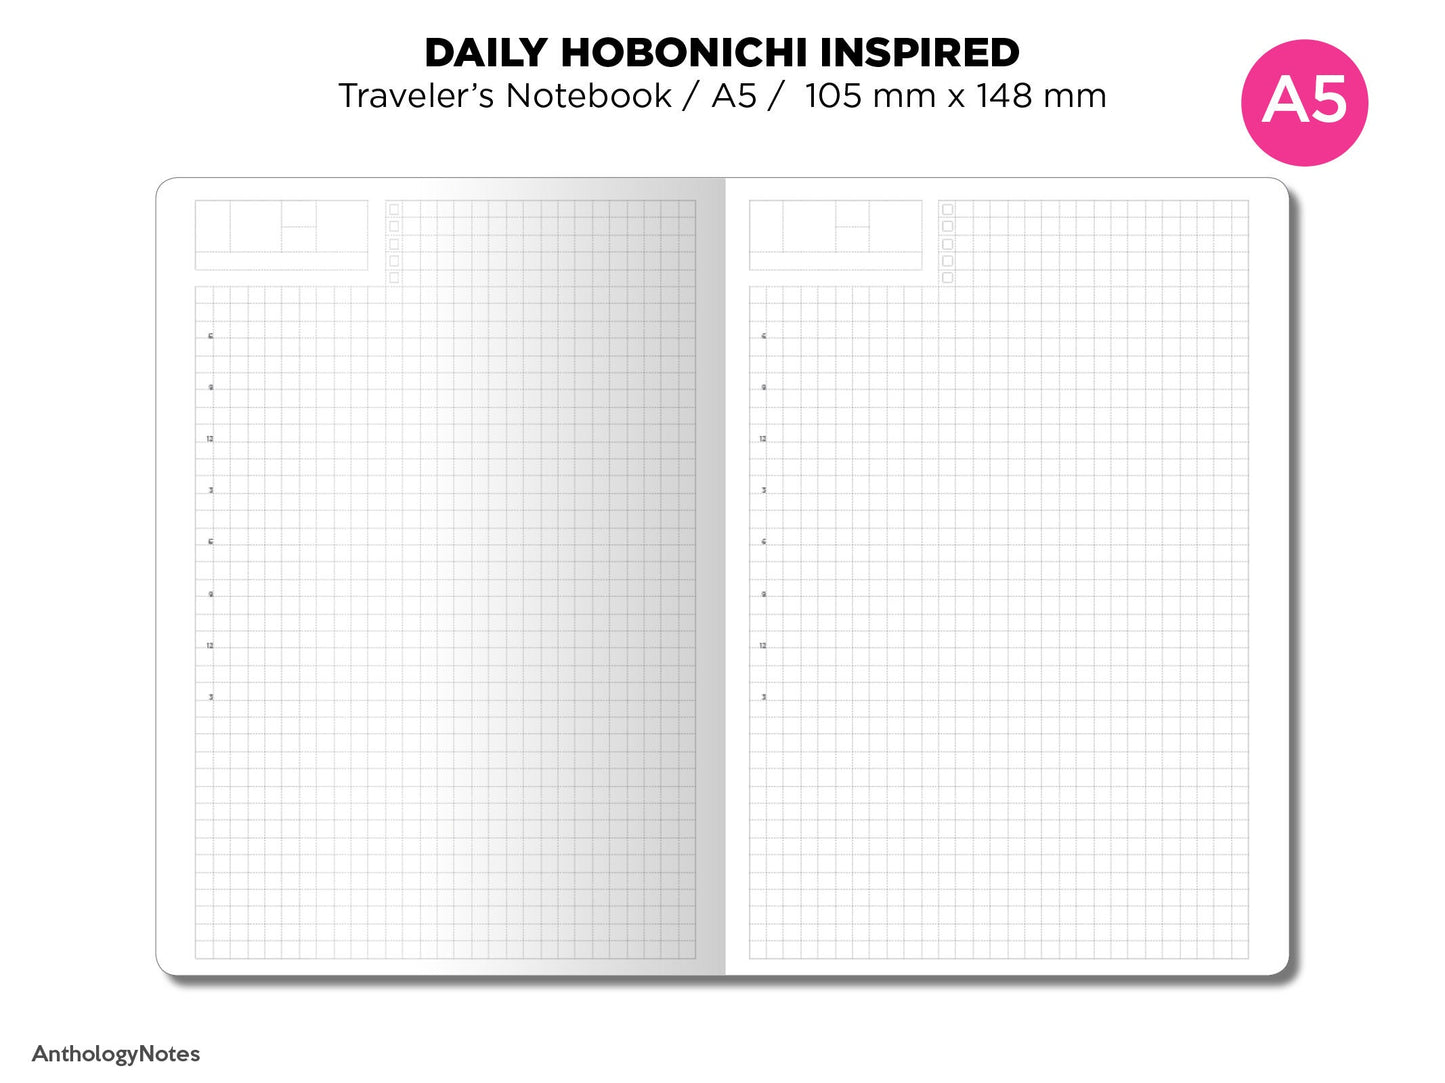 A5 Daily View Grid Traveler's Notebook Printable Insert - Do1P - Minimalist - Functional HOBONICHI Inspired